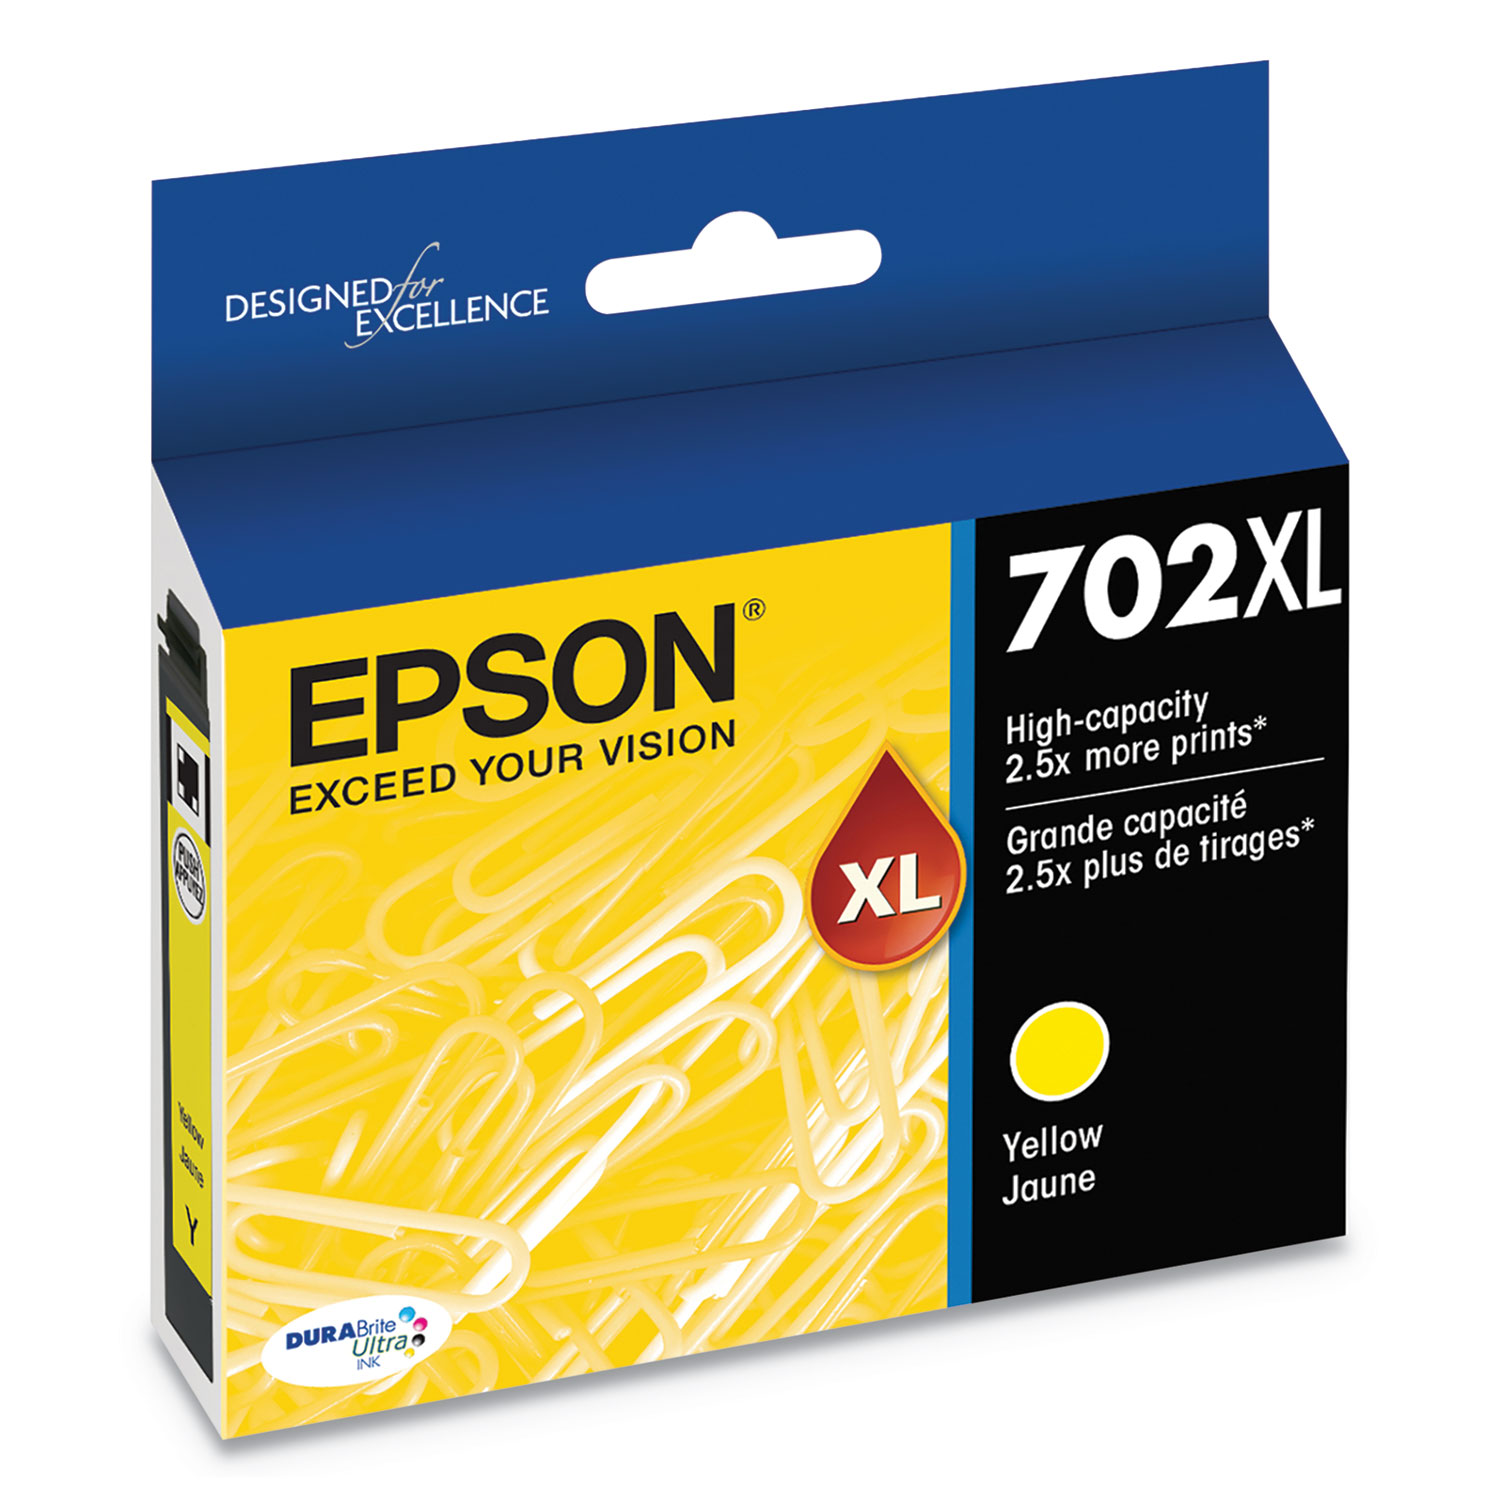 Epson 702xl T702xl420 S New Durabrite Ultra High Capacity Yellow Ink Cartridge Yields Up To 950 0273